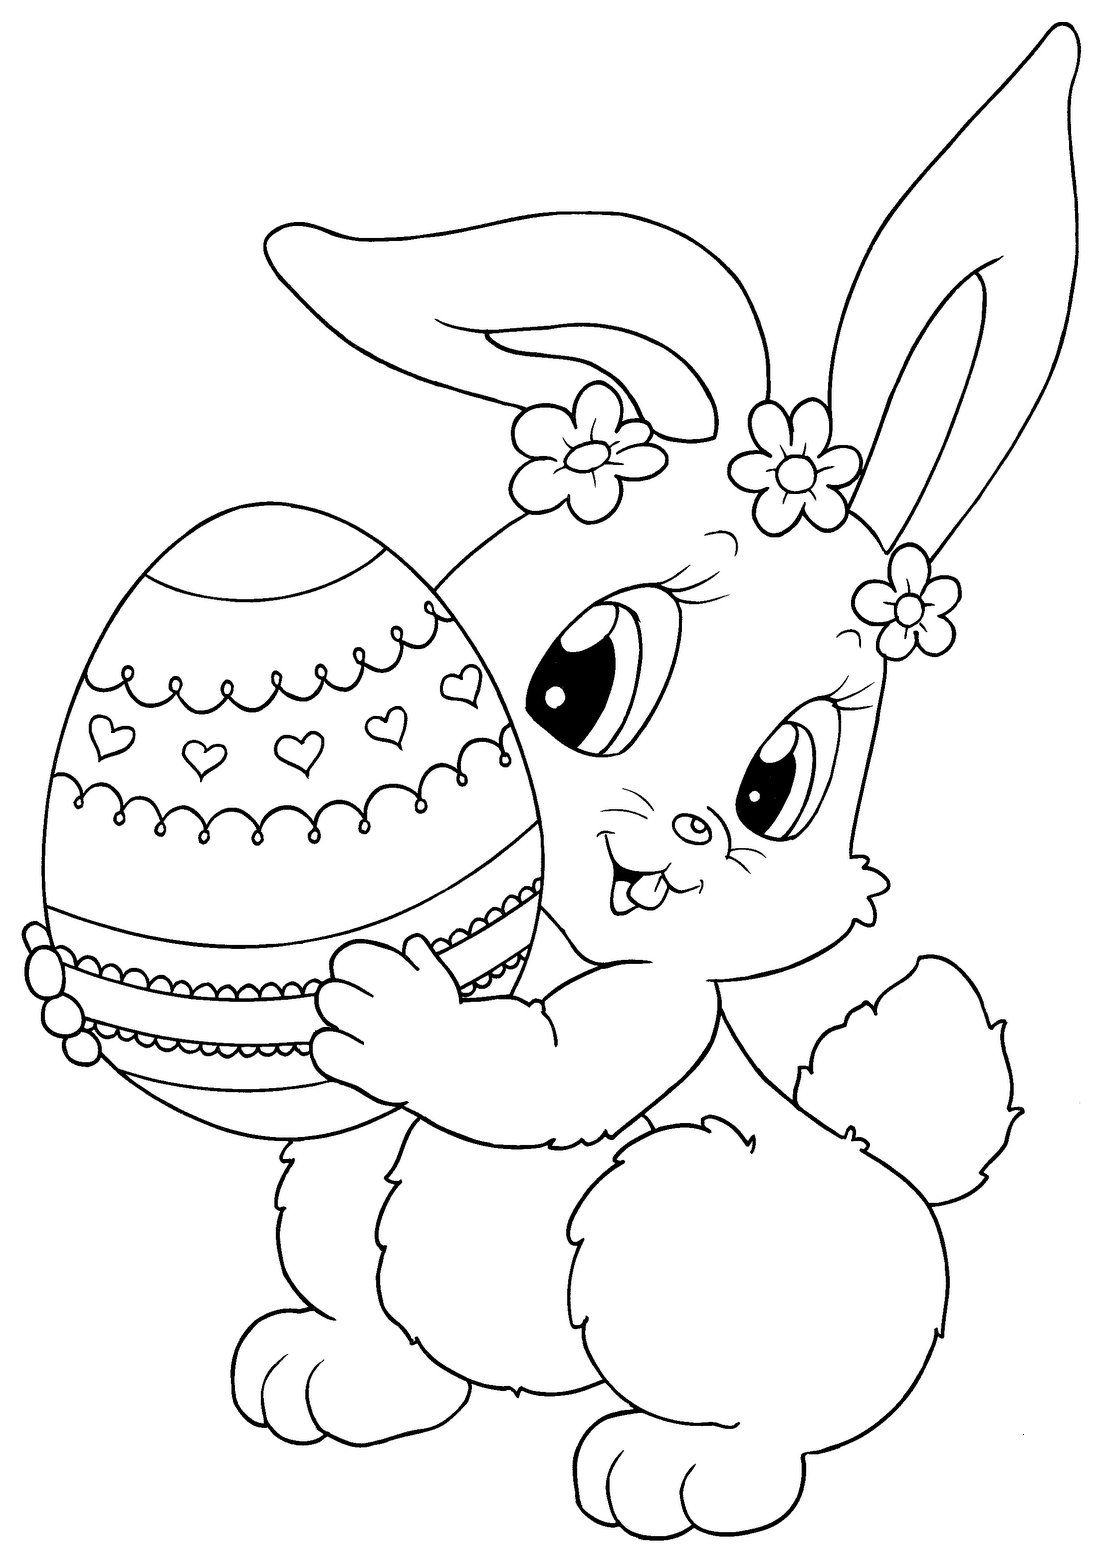 bunny with carrot coloring pages